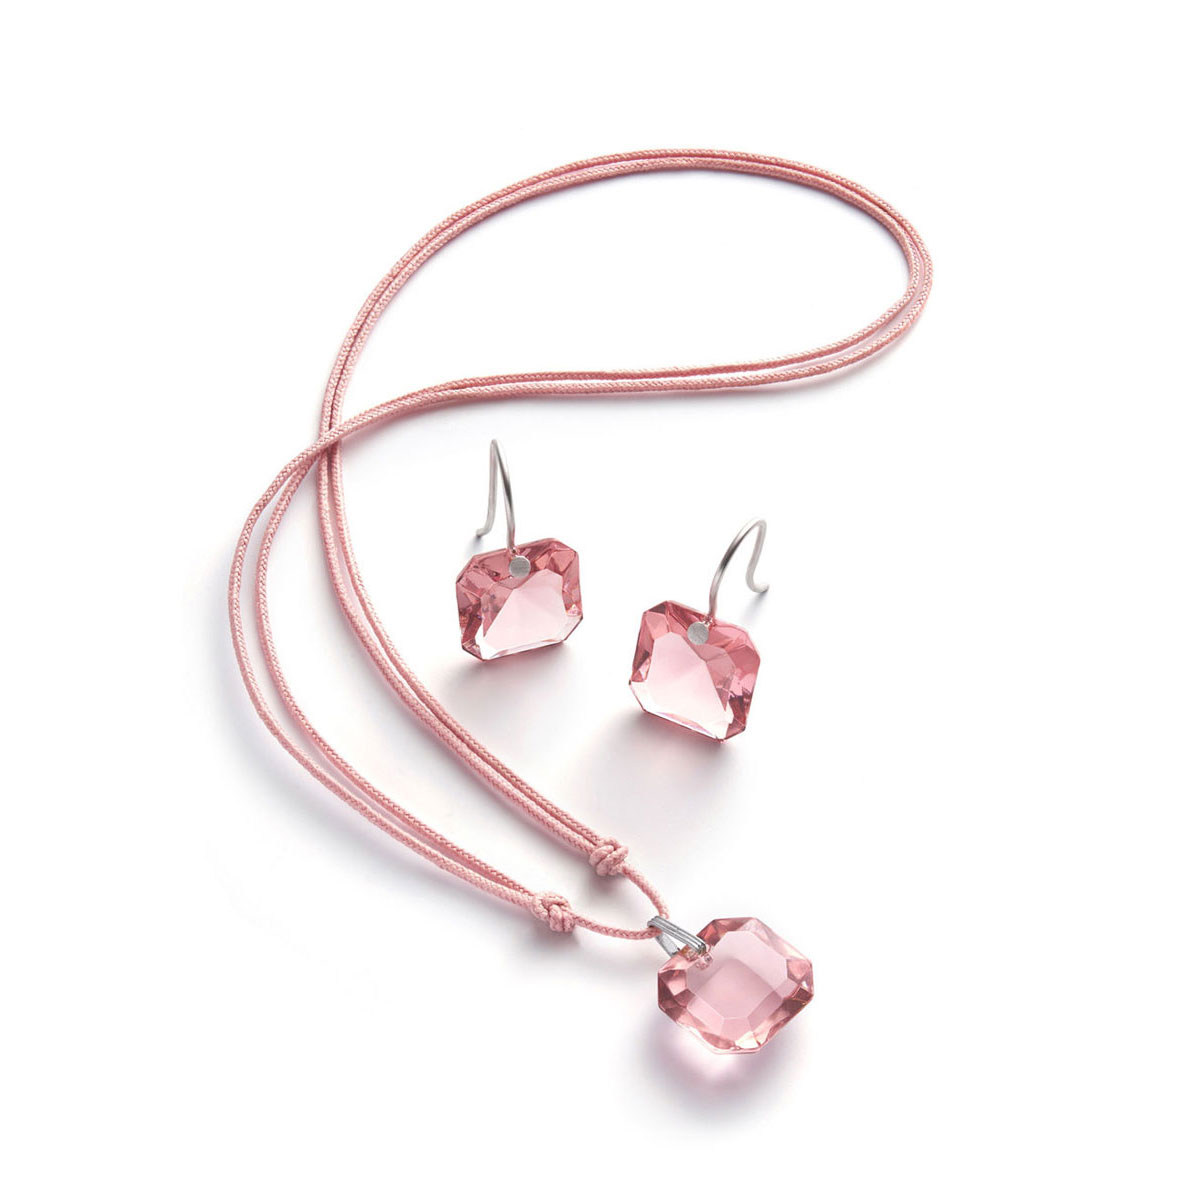 Baccarat Crystal Marie-Helene De Taillac Earrings Small Wire Sterling Silver Light Pink